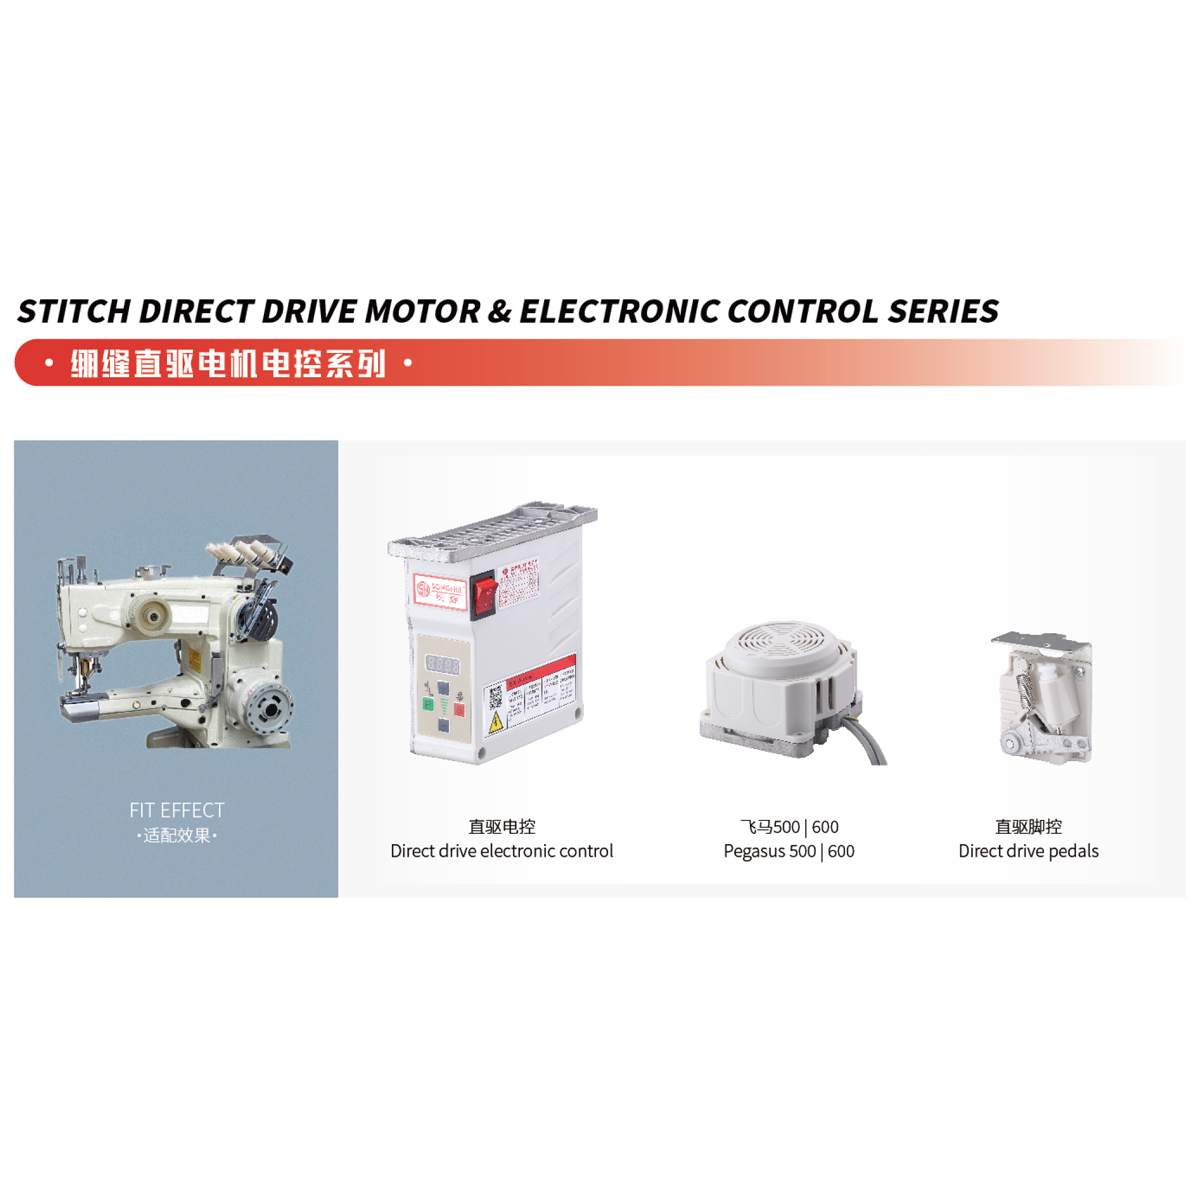 STITCH DIRECT DRIVE MOTOR & ELECTRONIC CONTROL SERIES